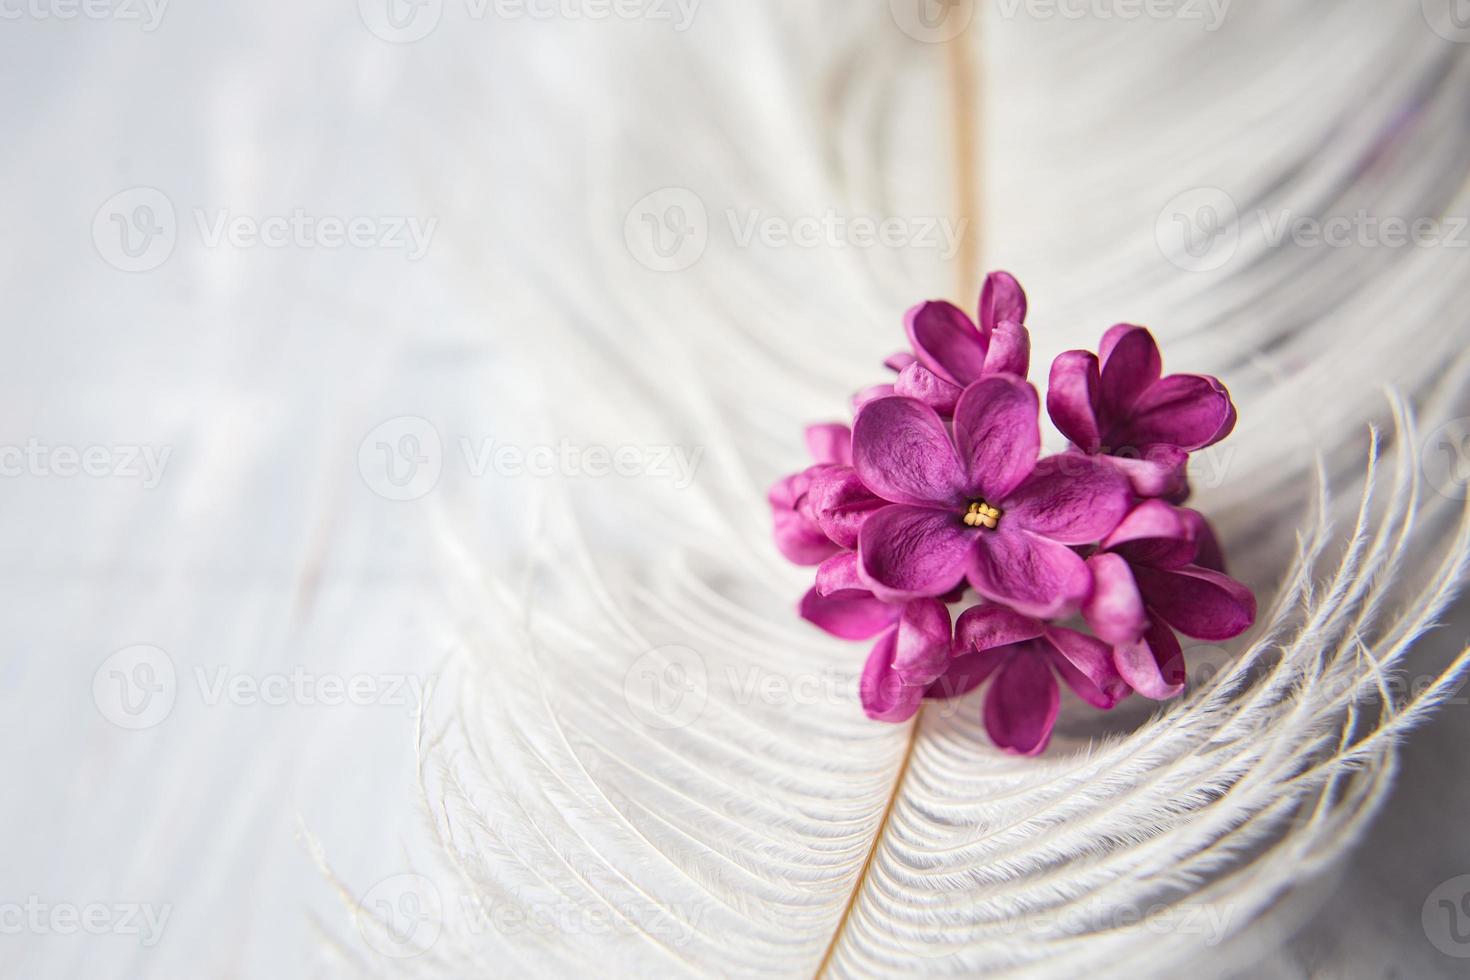 Lilac violet flowers on a white ostrich feather. A lilac luck - flower with five petals among the four-pointed flowers of bright pink lilac. The magic of lilac flowers with five petals. Mock up photo